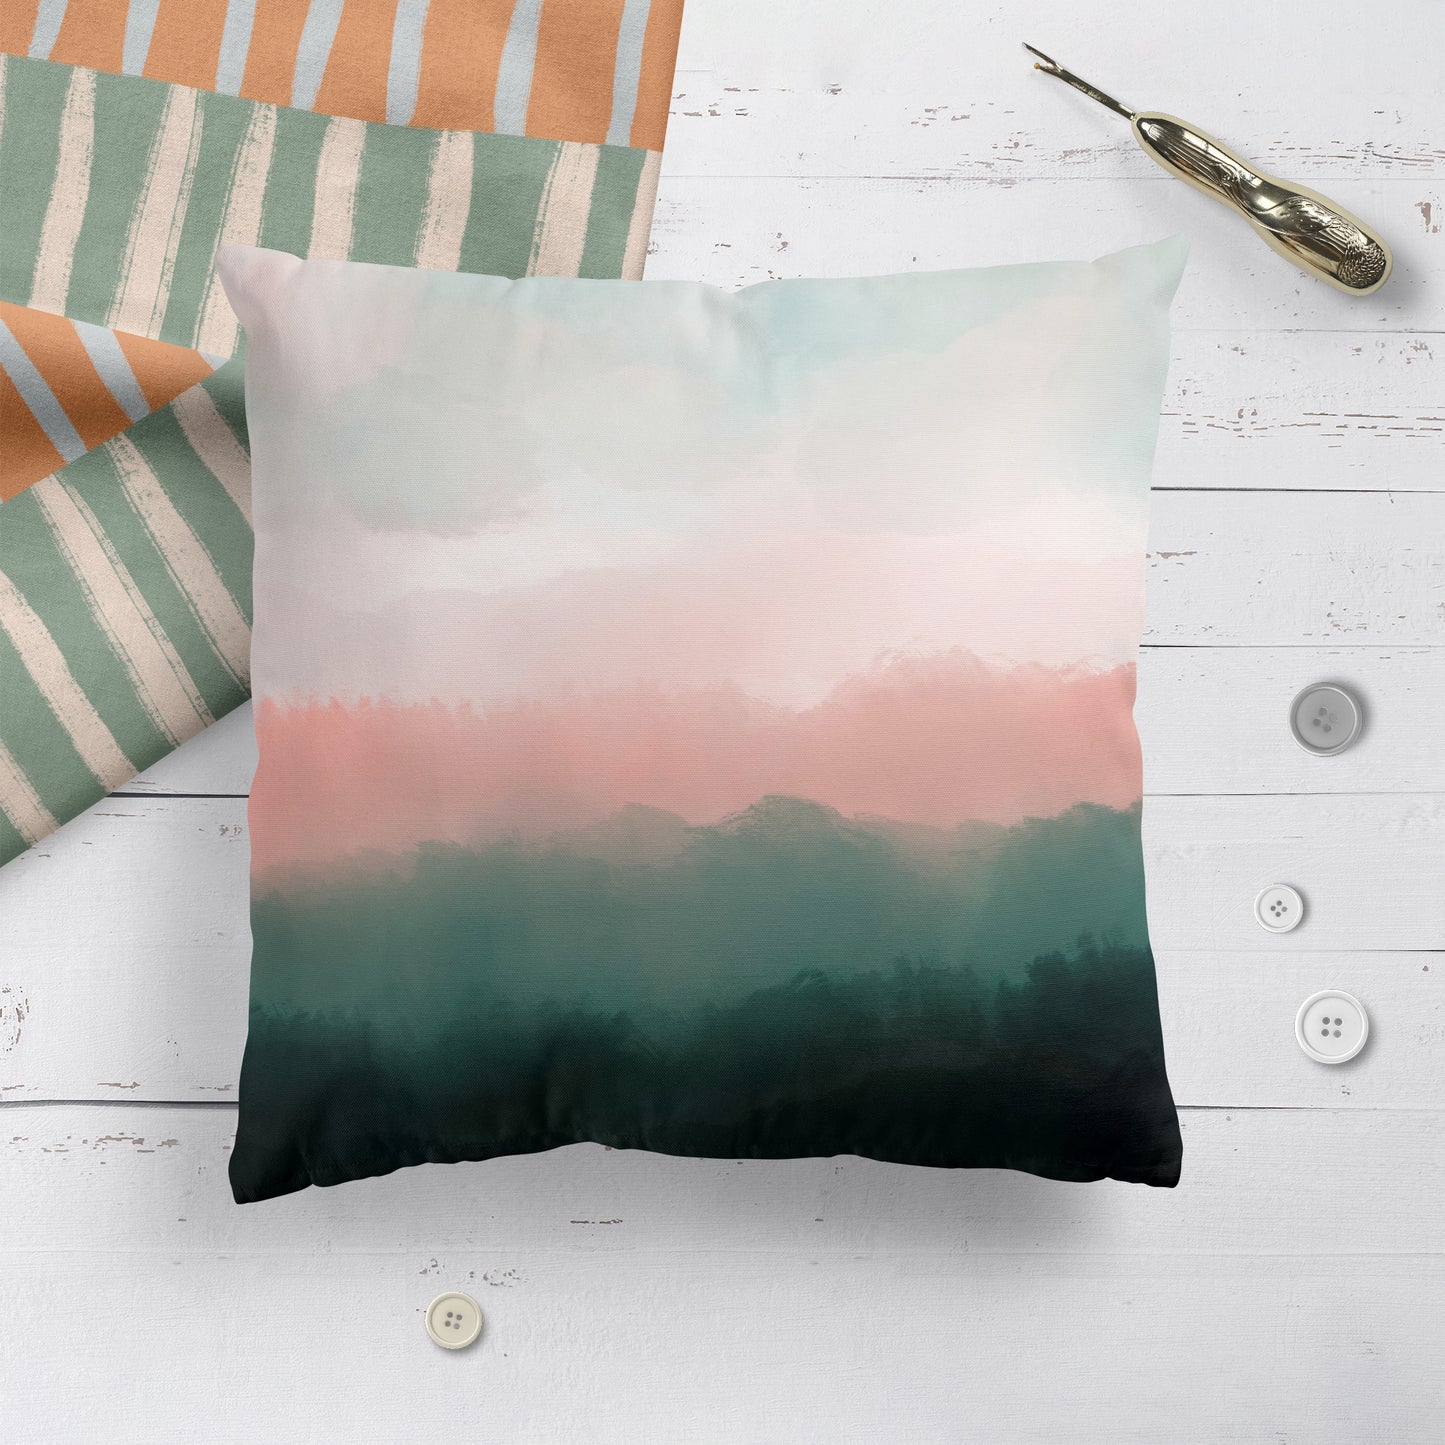 Cloudy Forest Unique Artistic Throw Pillow